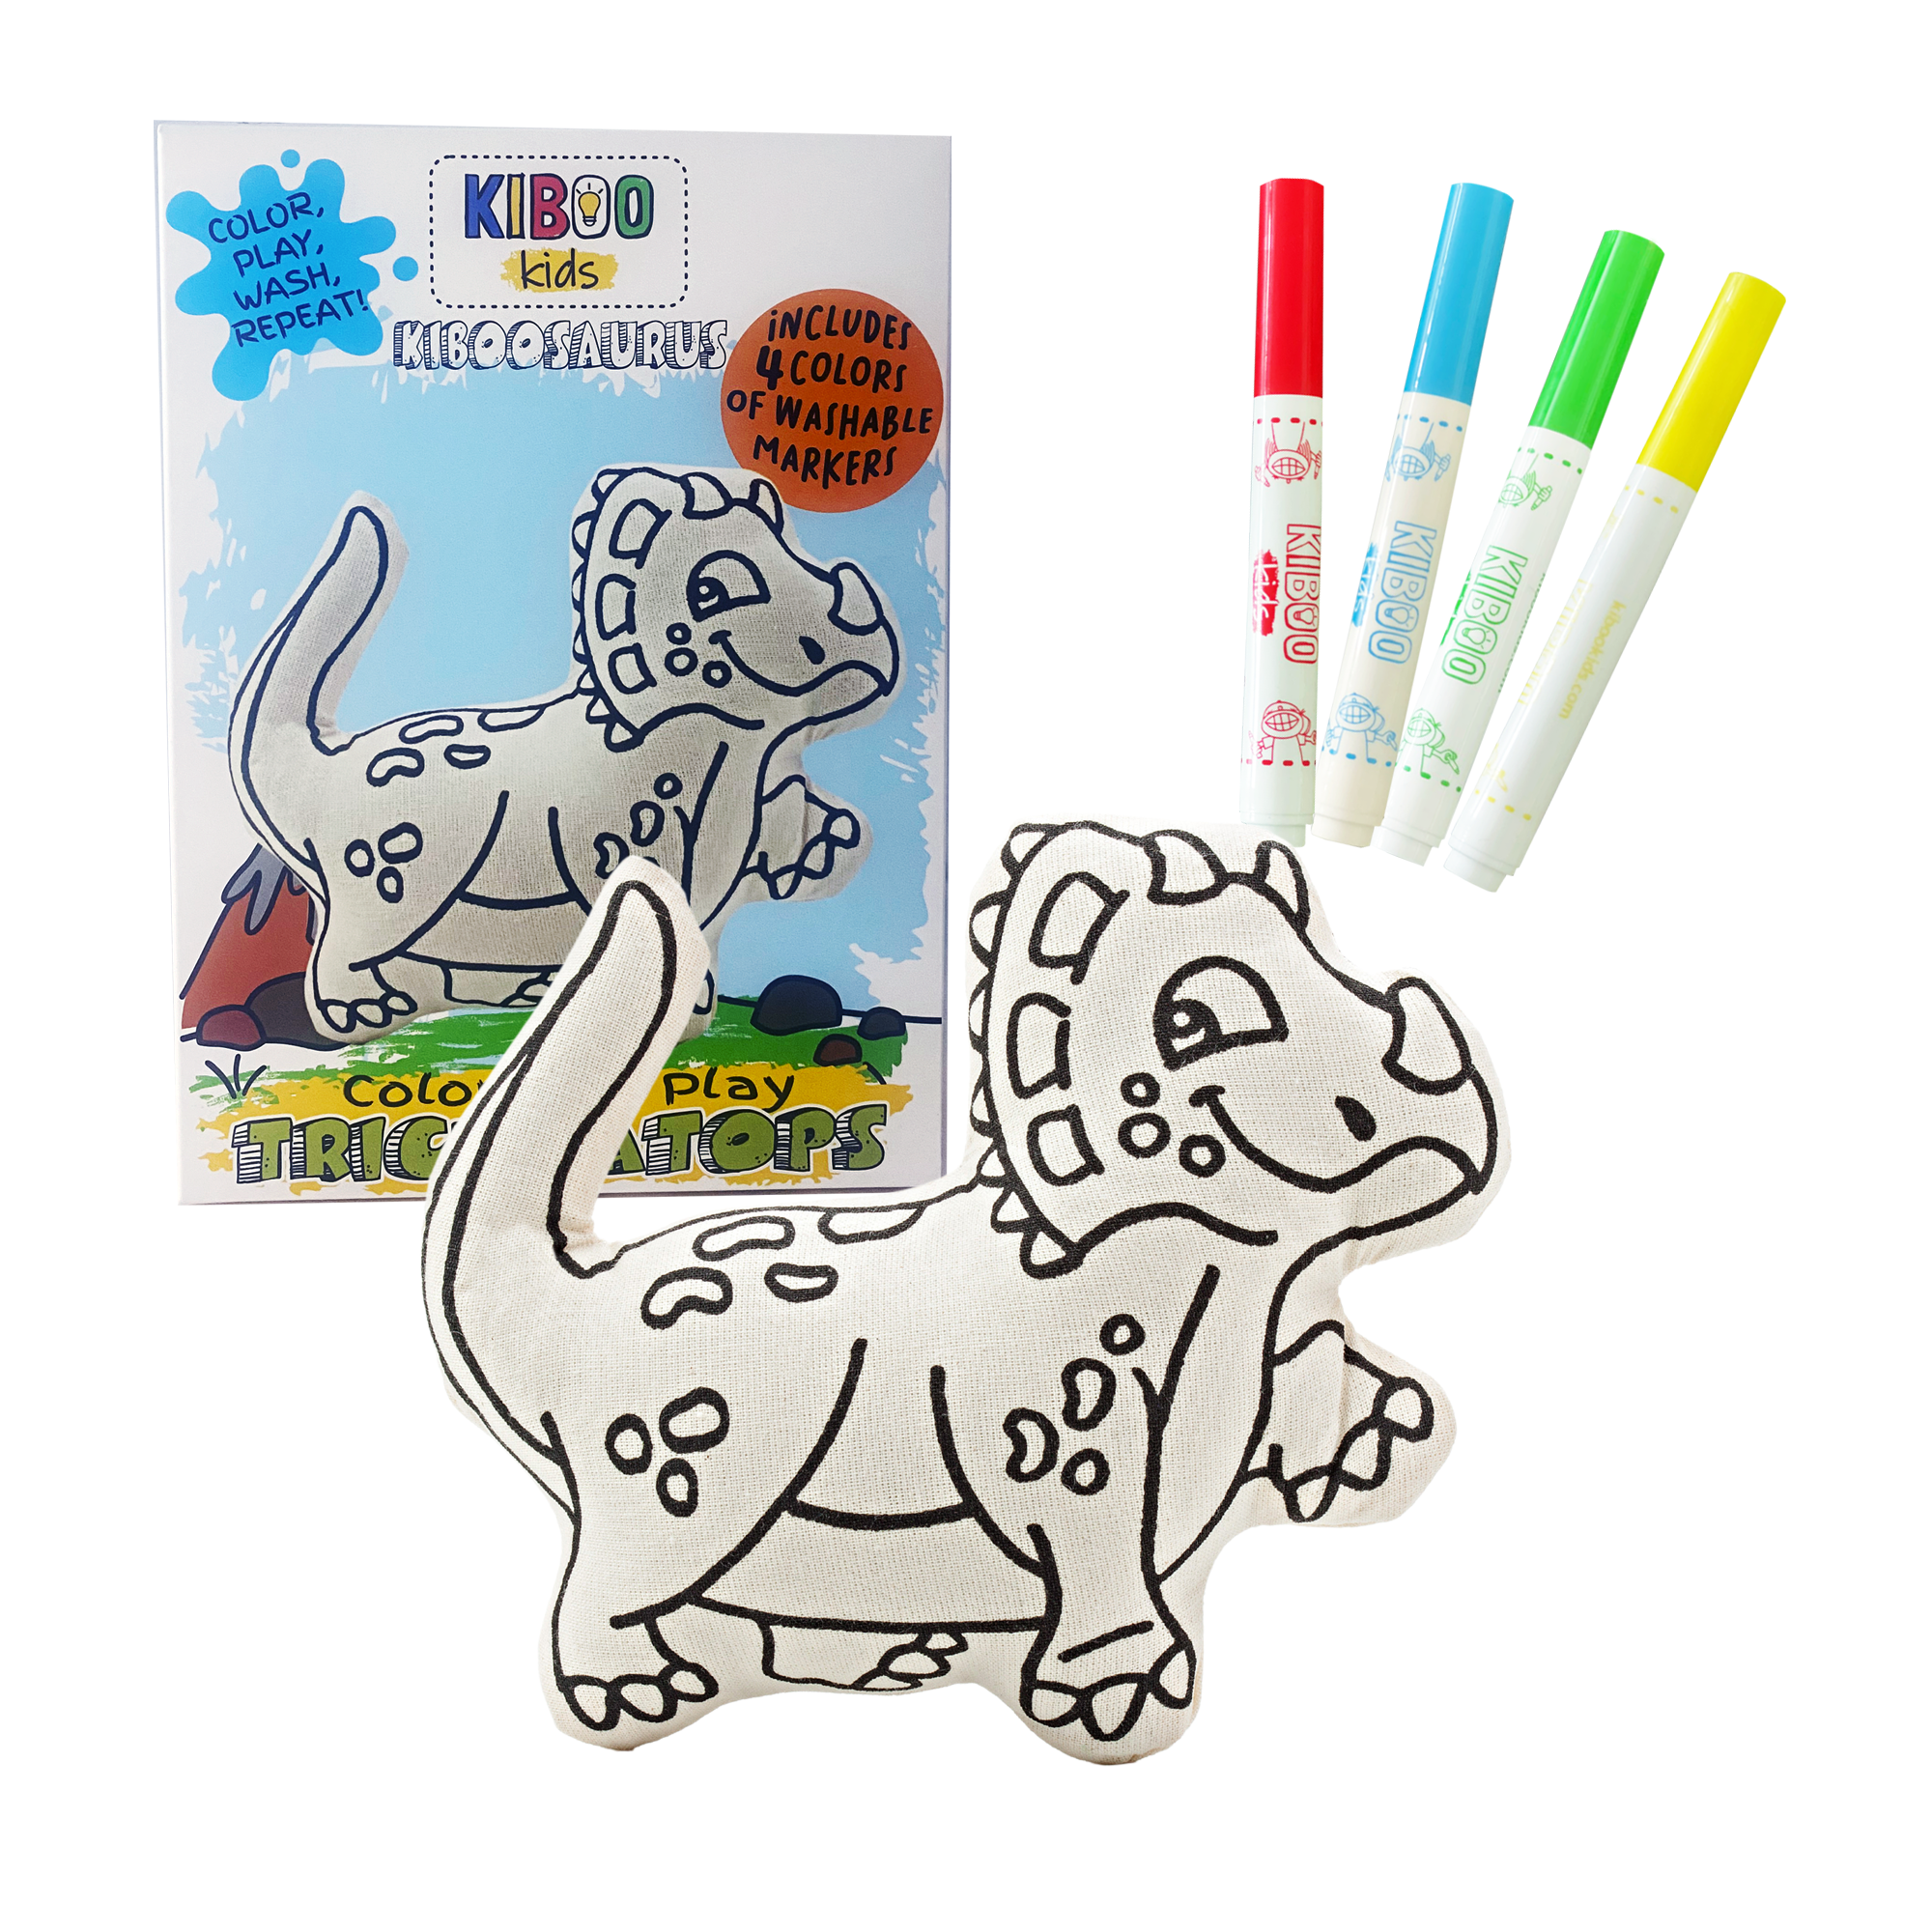 Kiboo Kids Jurassic Series: Triceratops Dinosaur For Coloring And Creative Play